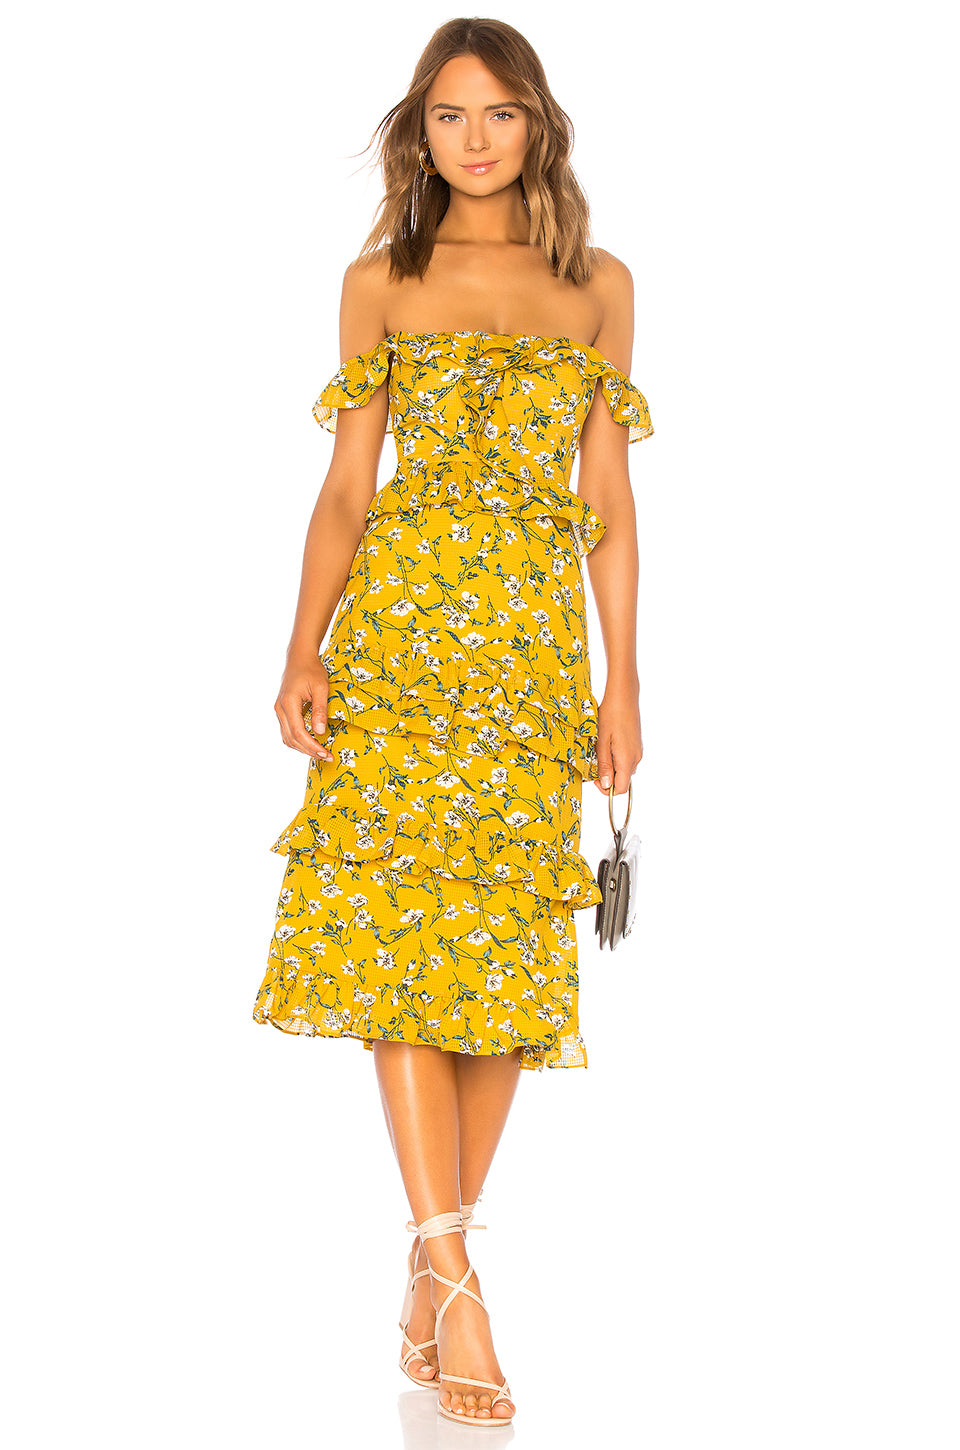 Lily Dress in YELLOW DOLLY FLORAL